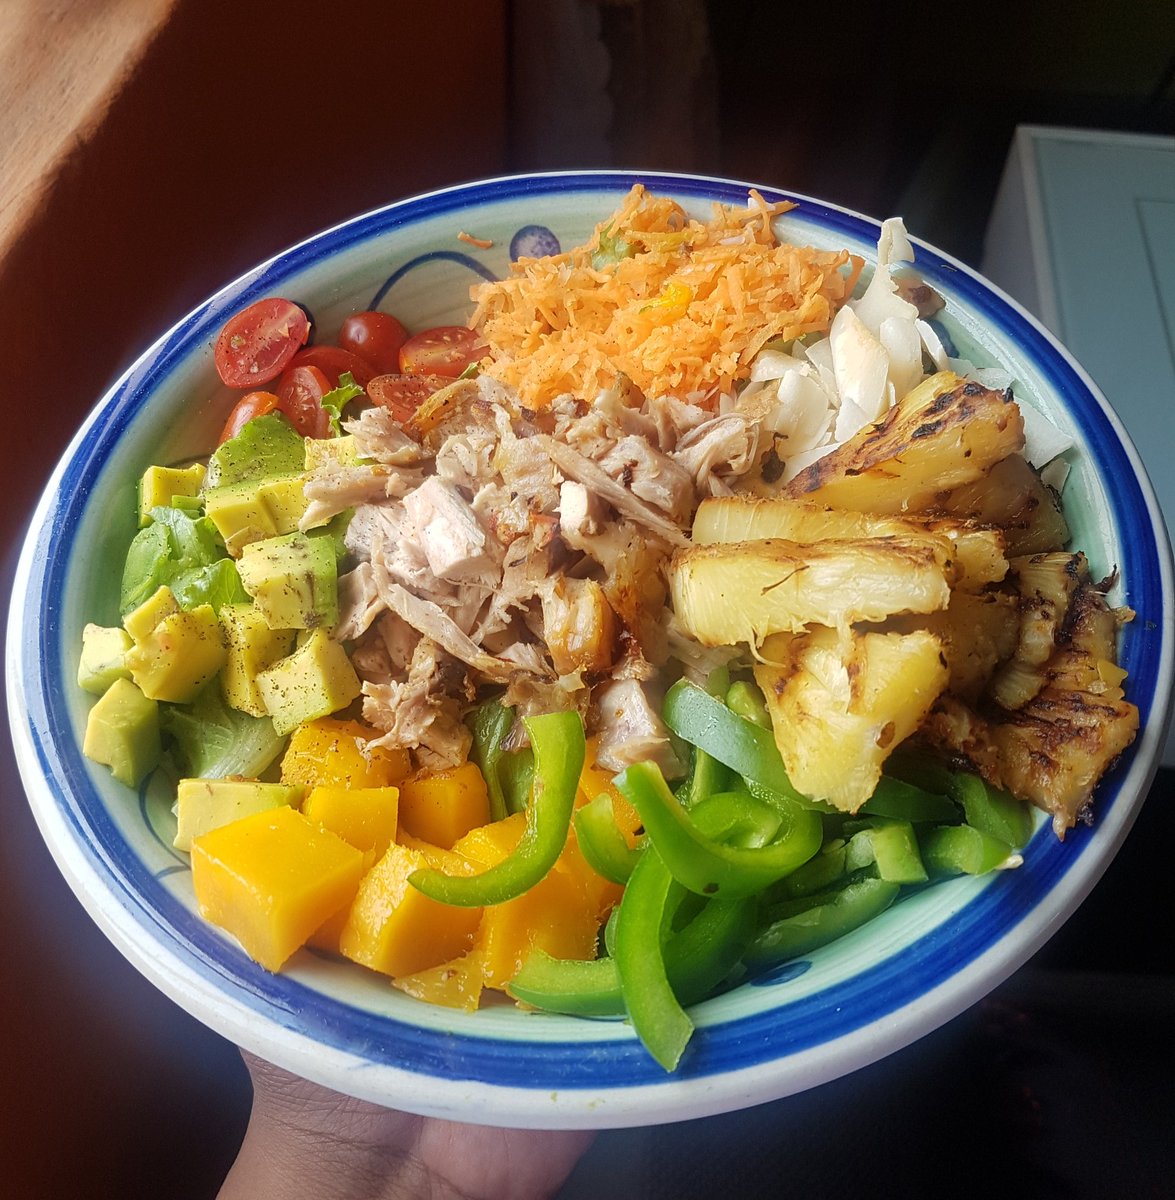 Quarantine cuisineLunchI was going for a tropical vibe so made a salad with grilled turkey, lettuce, avocado, cherry tomatoes, carrots, green peppers, mango, coconut chips and grilled pineapples